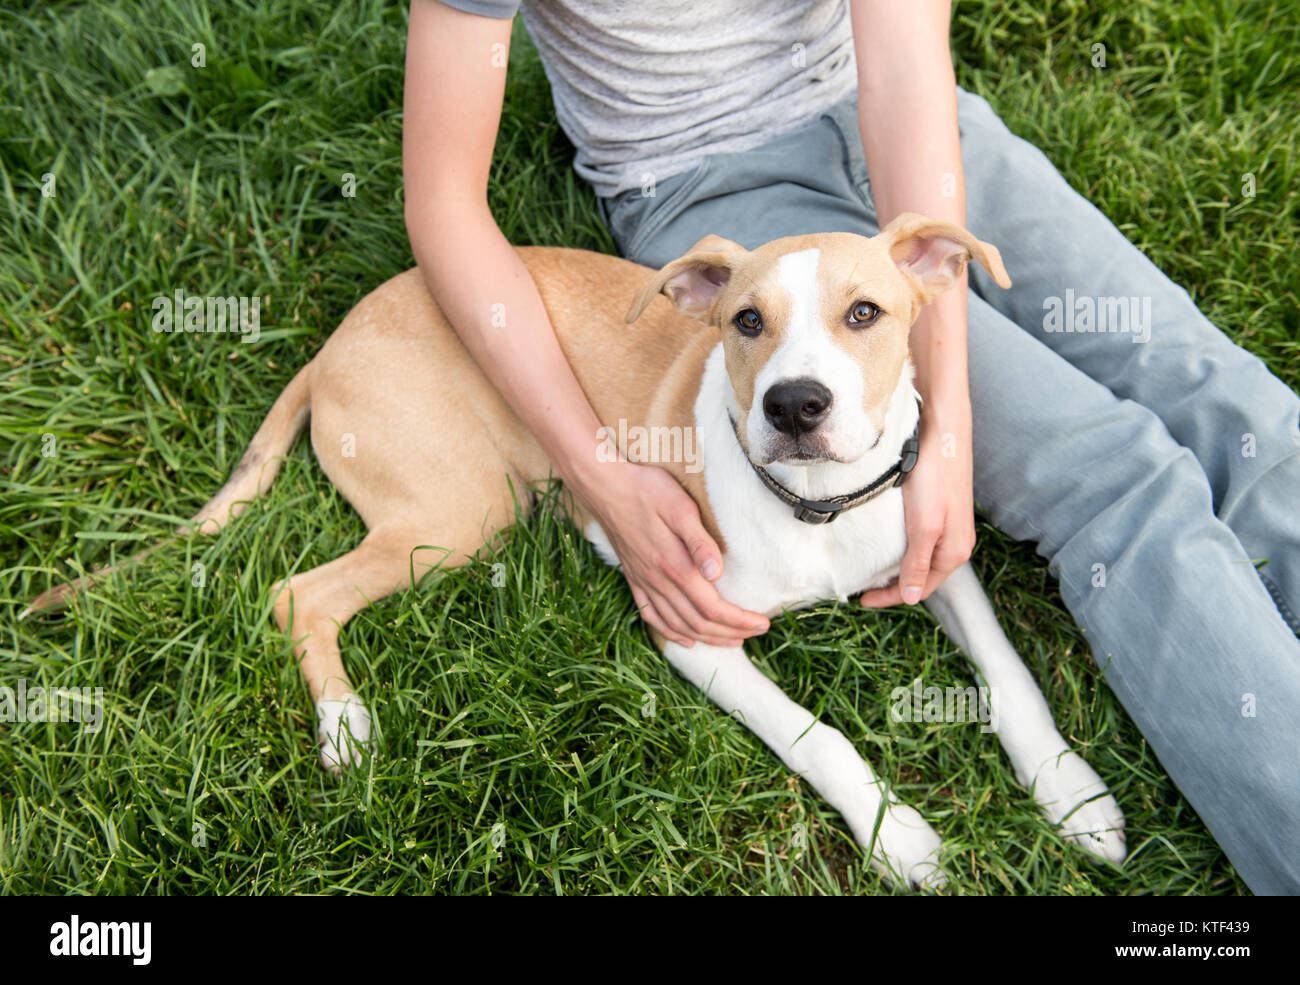 Cute Young Dog Laying Down Next to Human Friend Stock Photo